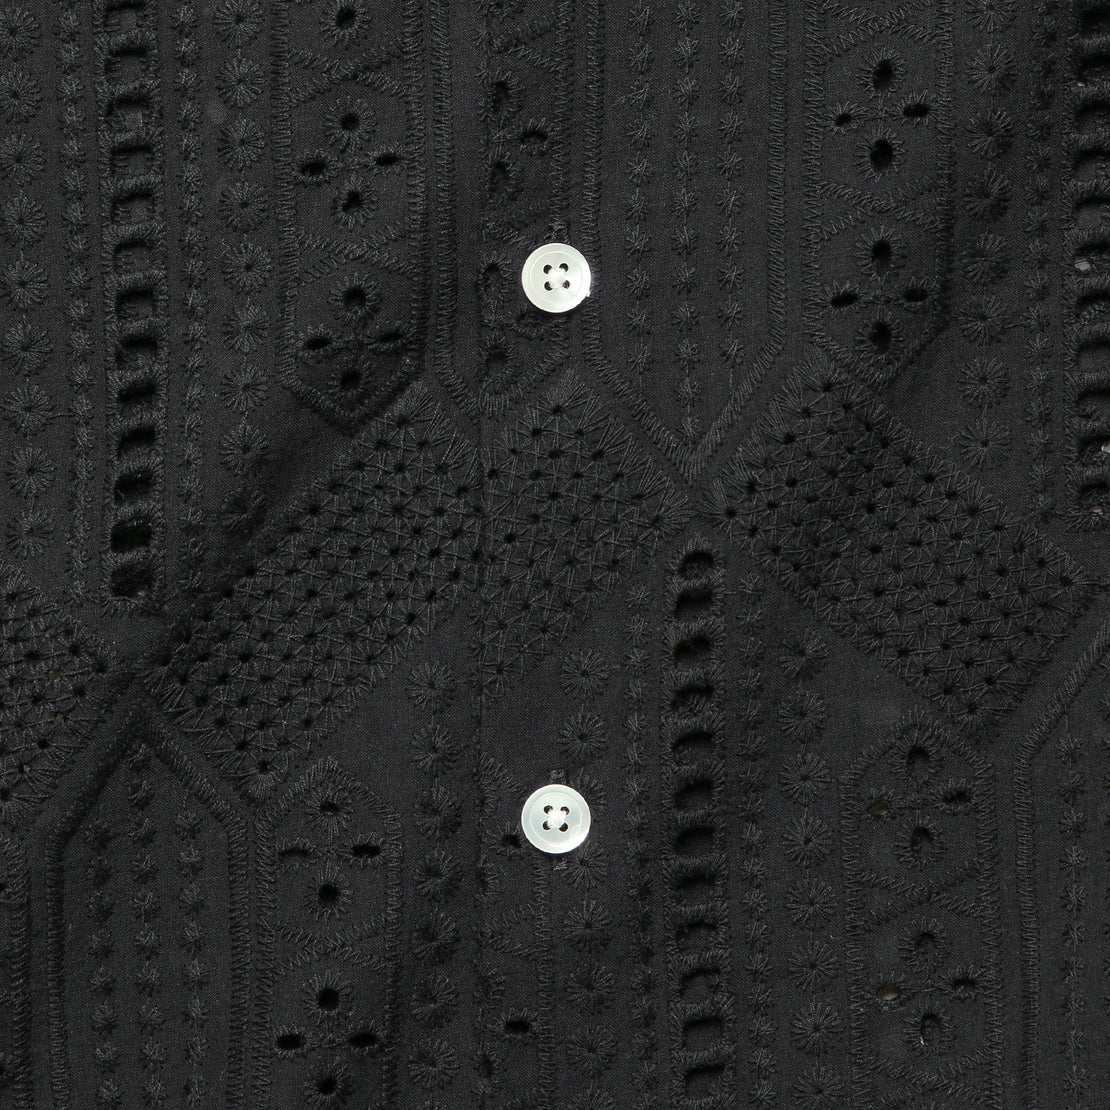 Eyelet Camp Shirt - Black - Portuguese Flannel - STAG Provisions - Tops - S/S Woven - Other Pattern